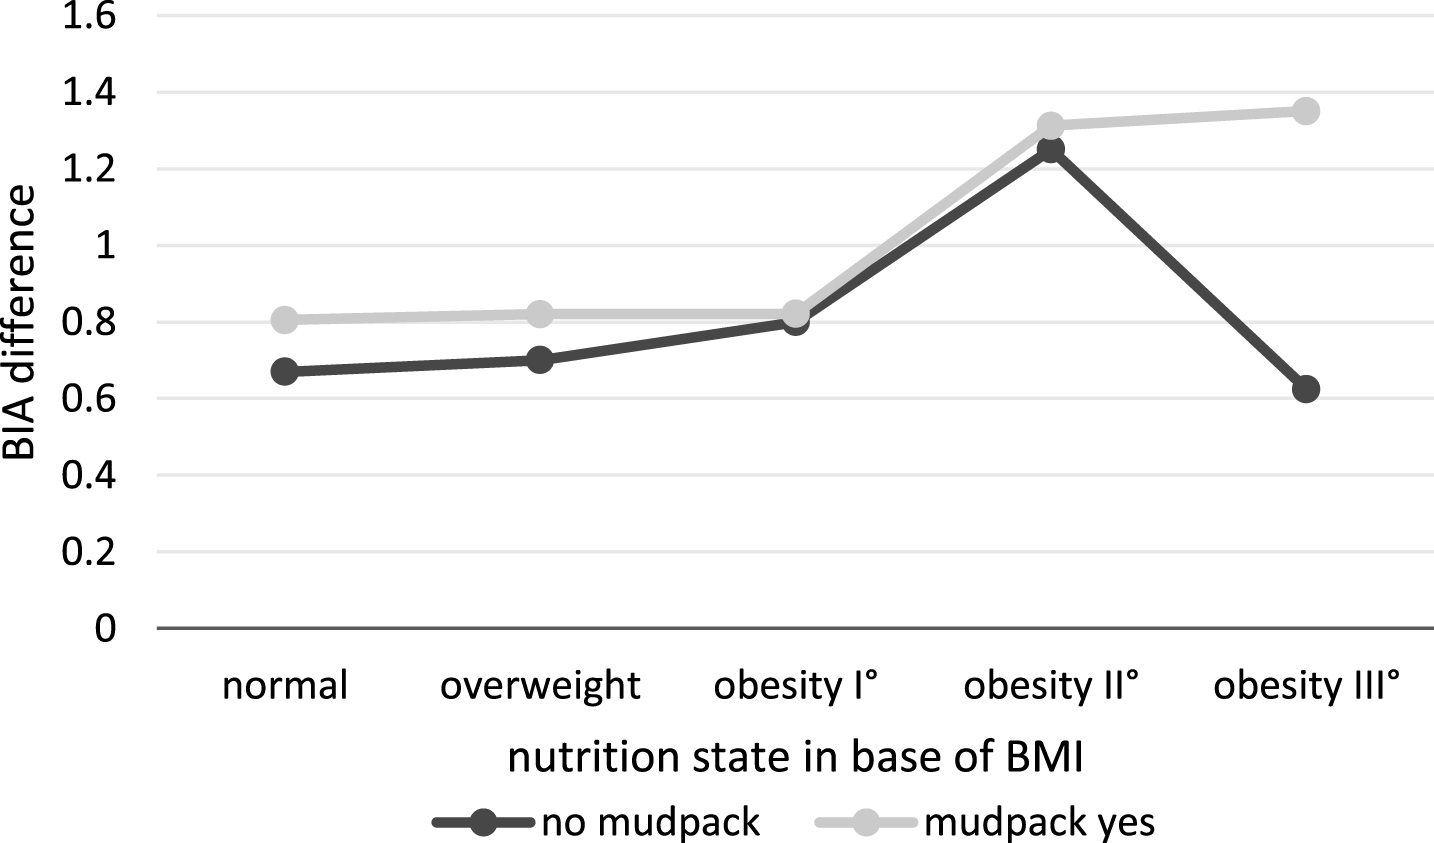 Reduction of BIA in patients who underwent diet and mudpack versus only diet.